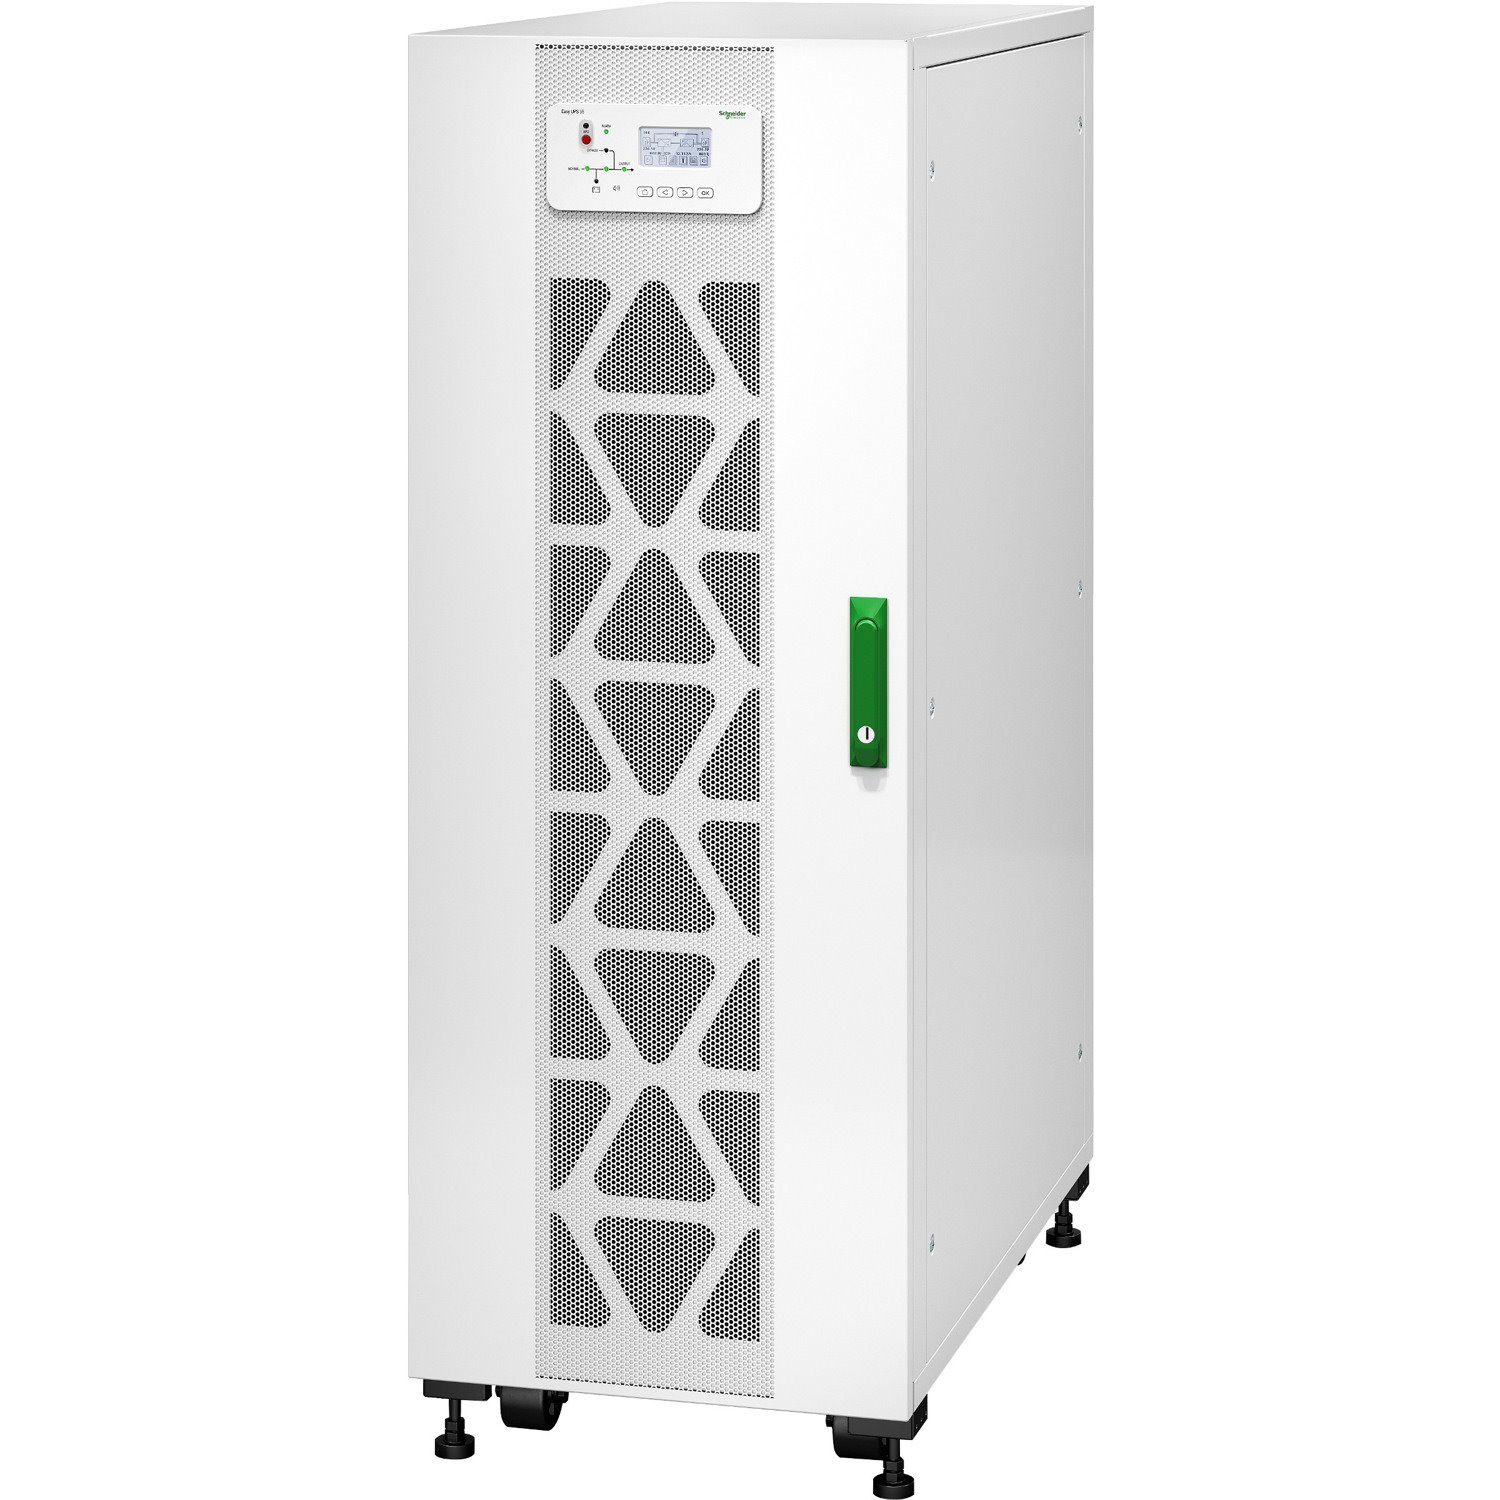 APC by Schneider Electric Easy UPS 3S Double Conversion Online UPS - 30 kVA - Three Phase